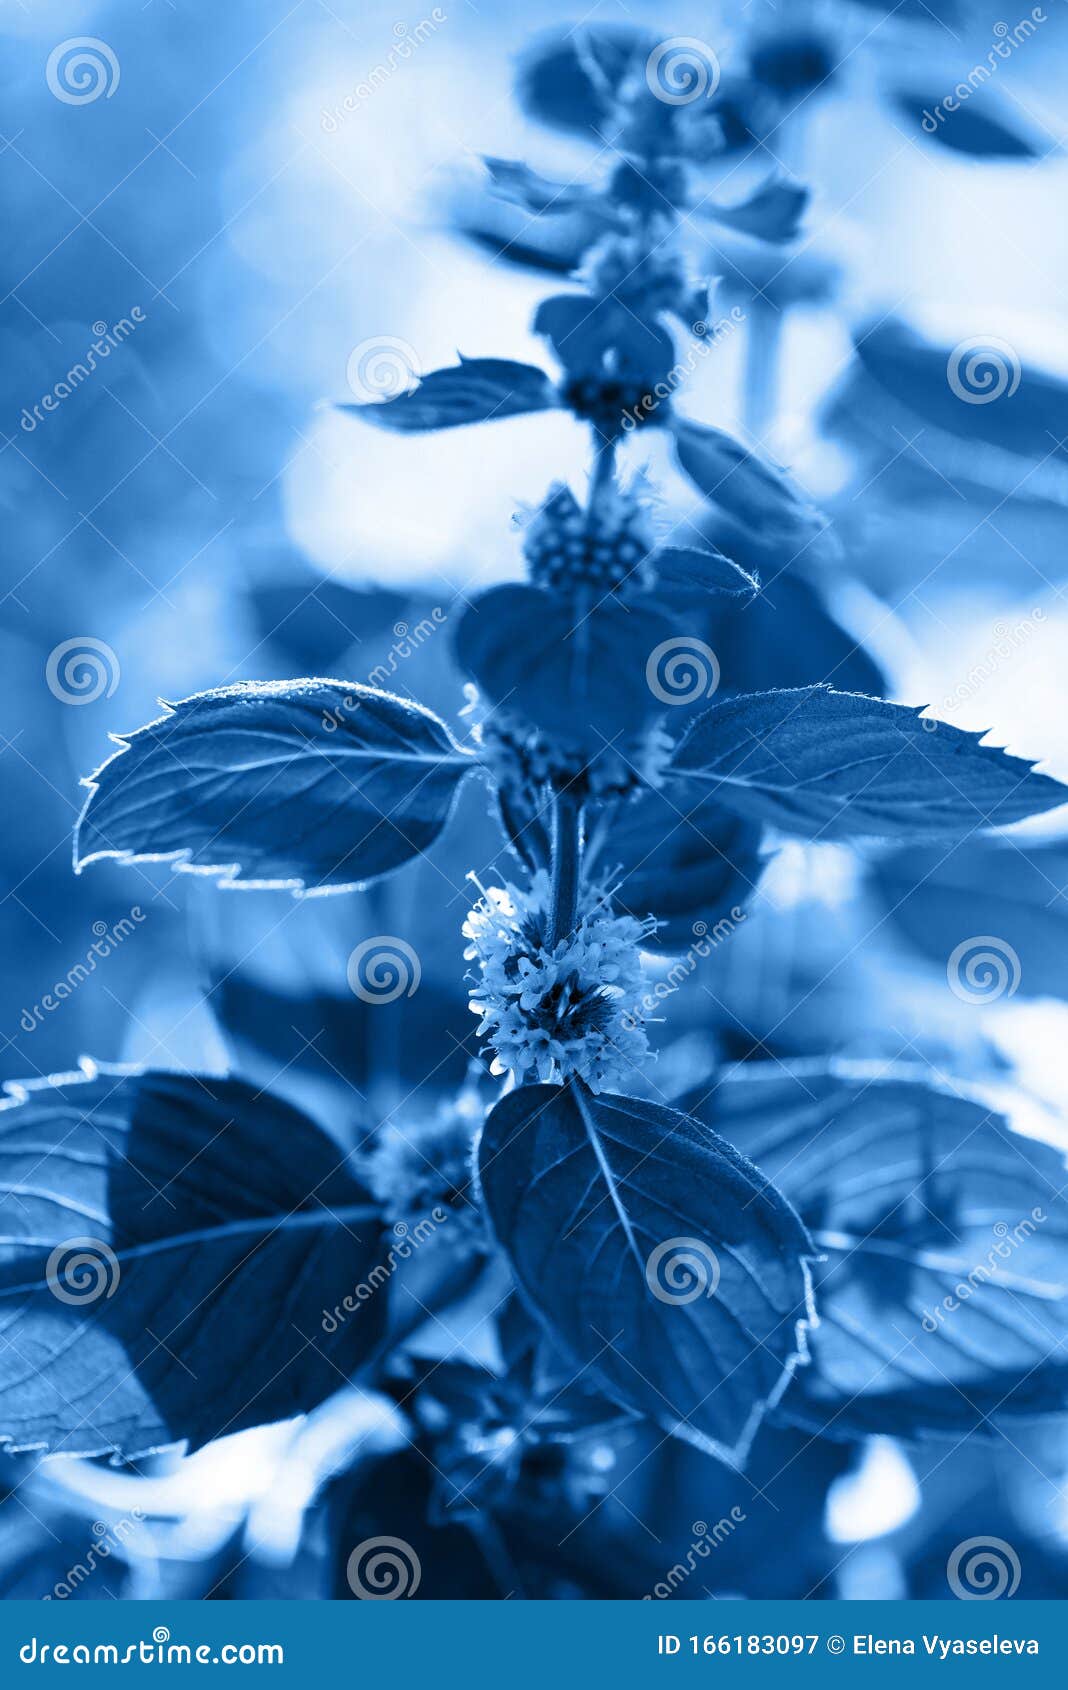 Plant Toned in Blue Color. Trendy Color Concept of the Classic Blue Background Editorial Photography - Image of leaf, 166183097